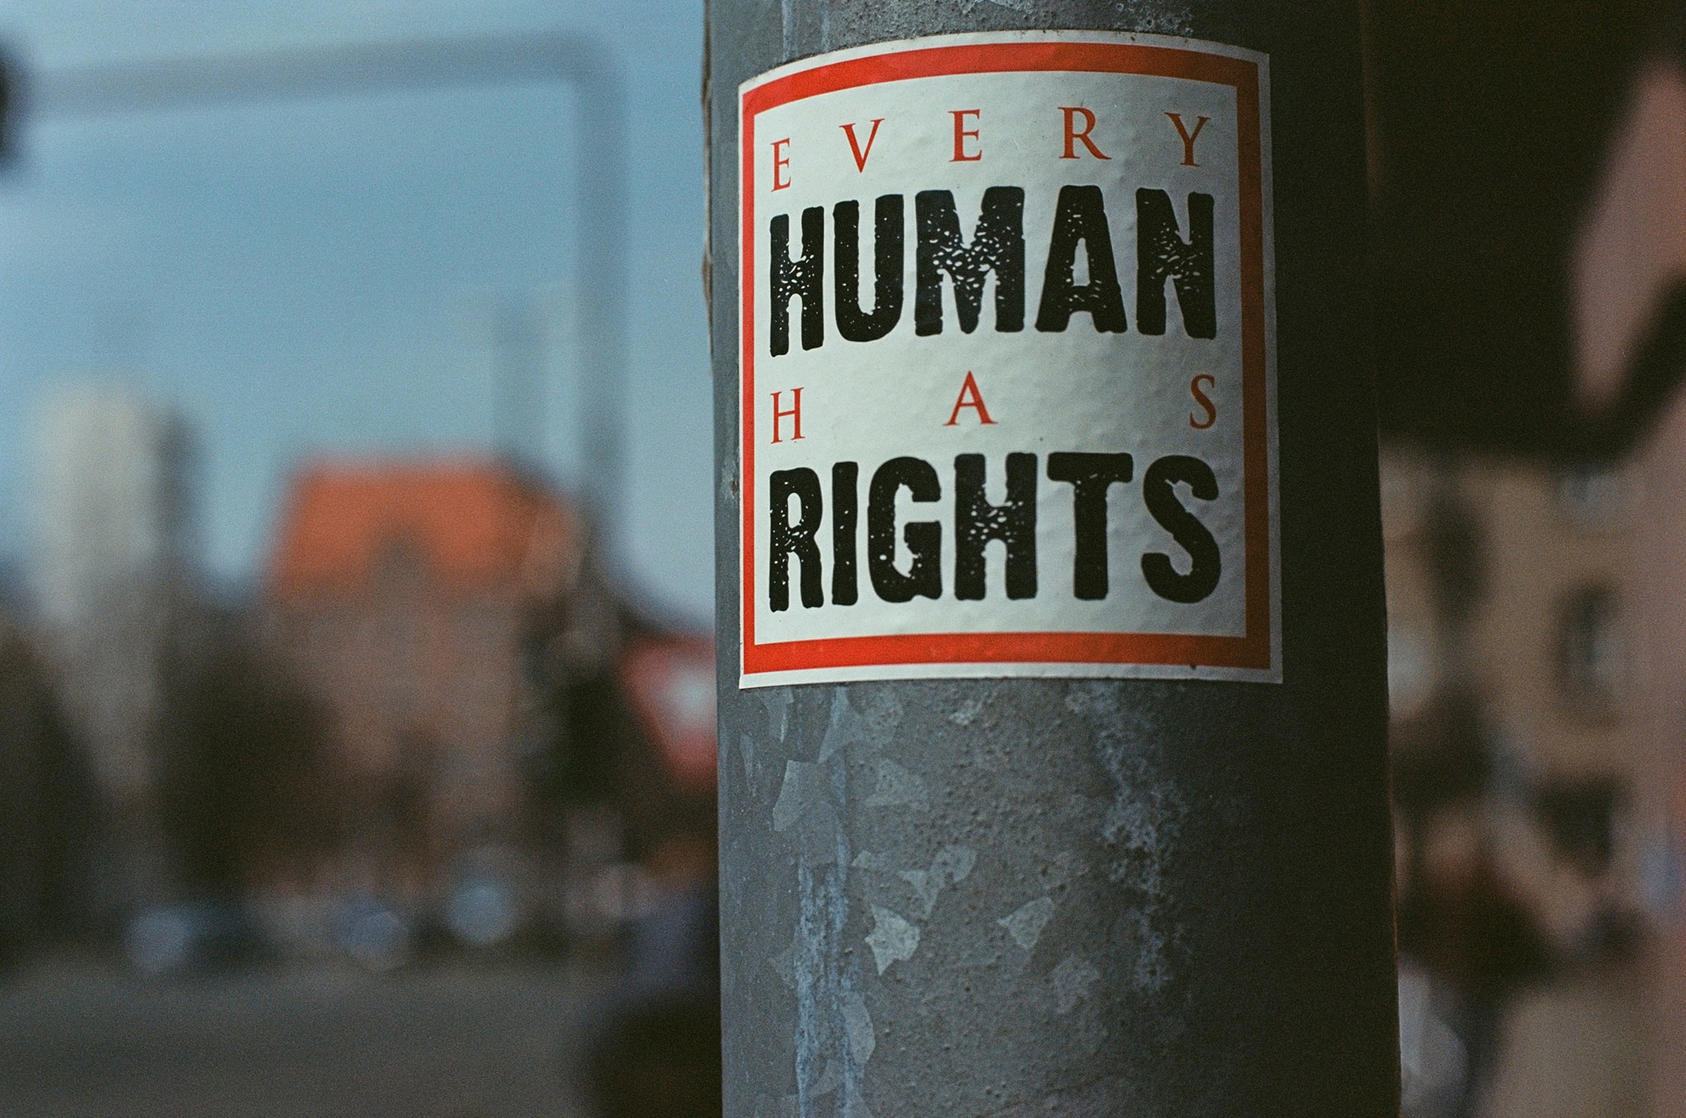 "Every Human Has Rights" sign on pole